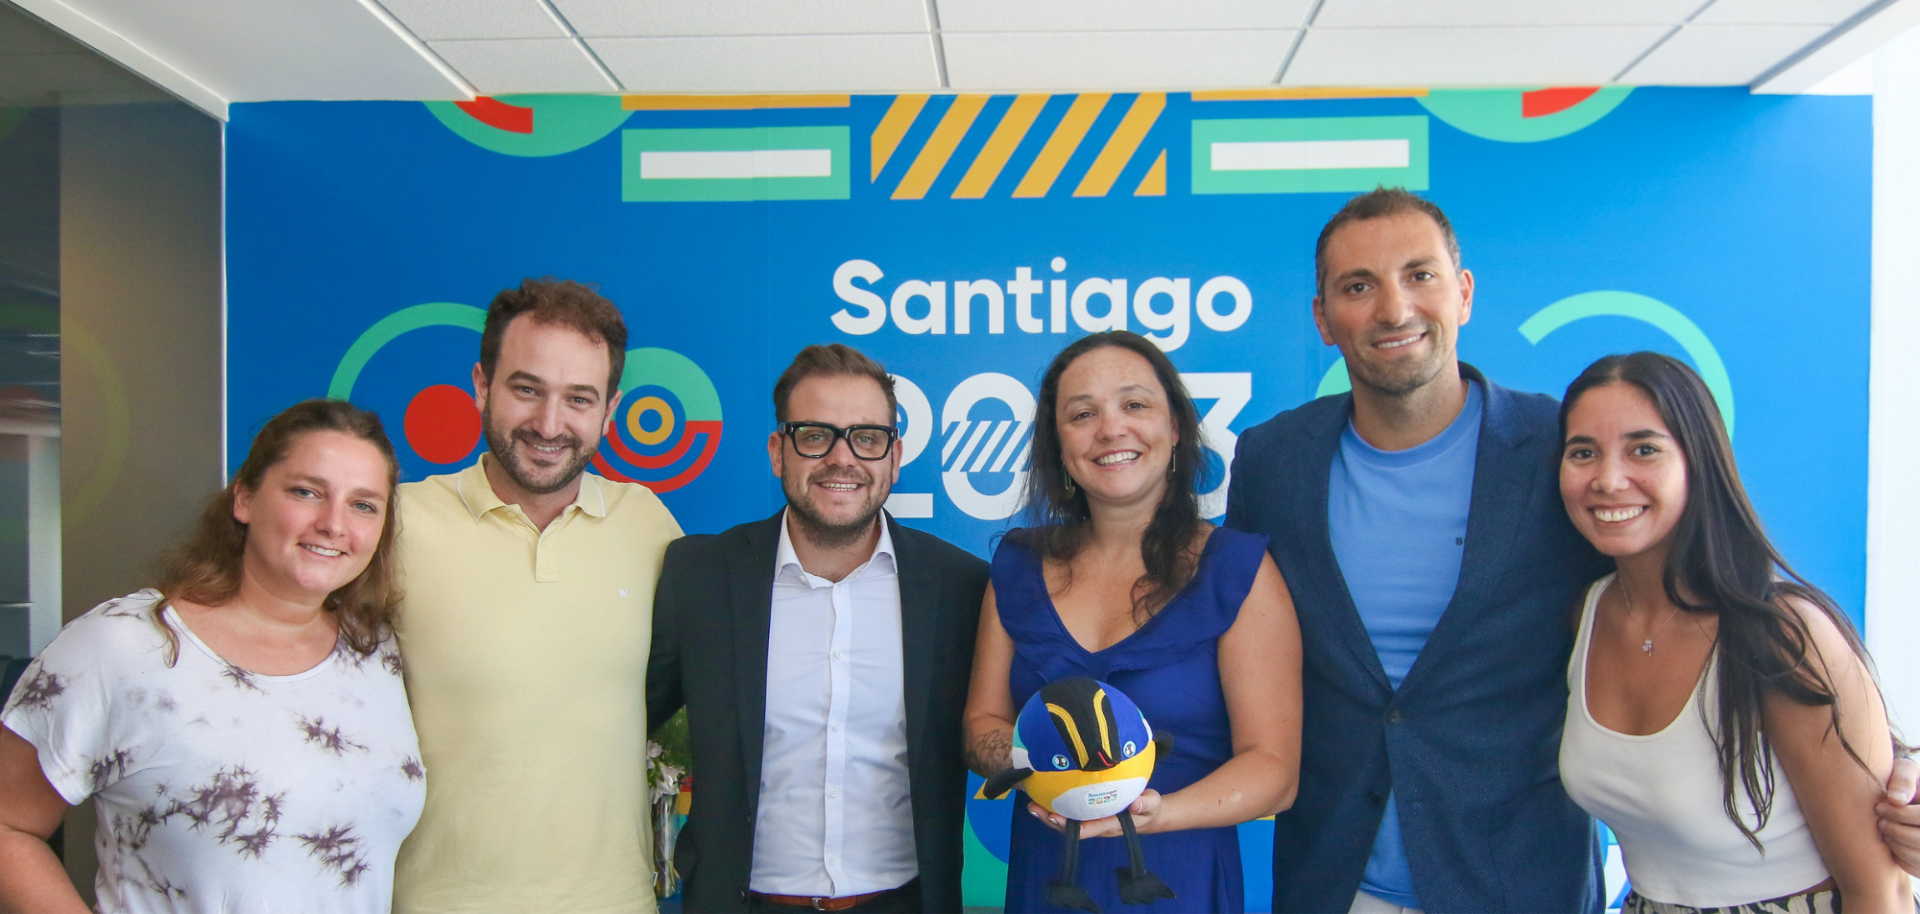 Santiago 2023 finalises deal with Lotus and Balich for Opening and Closing Ceremonies